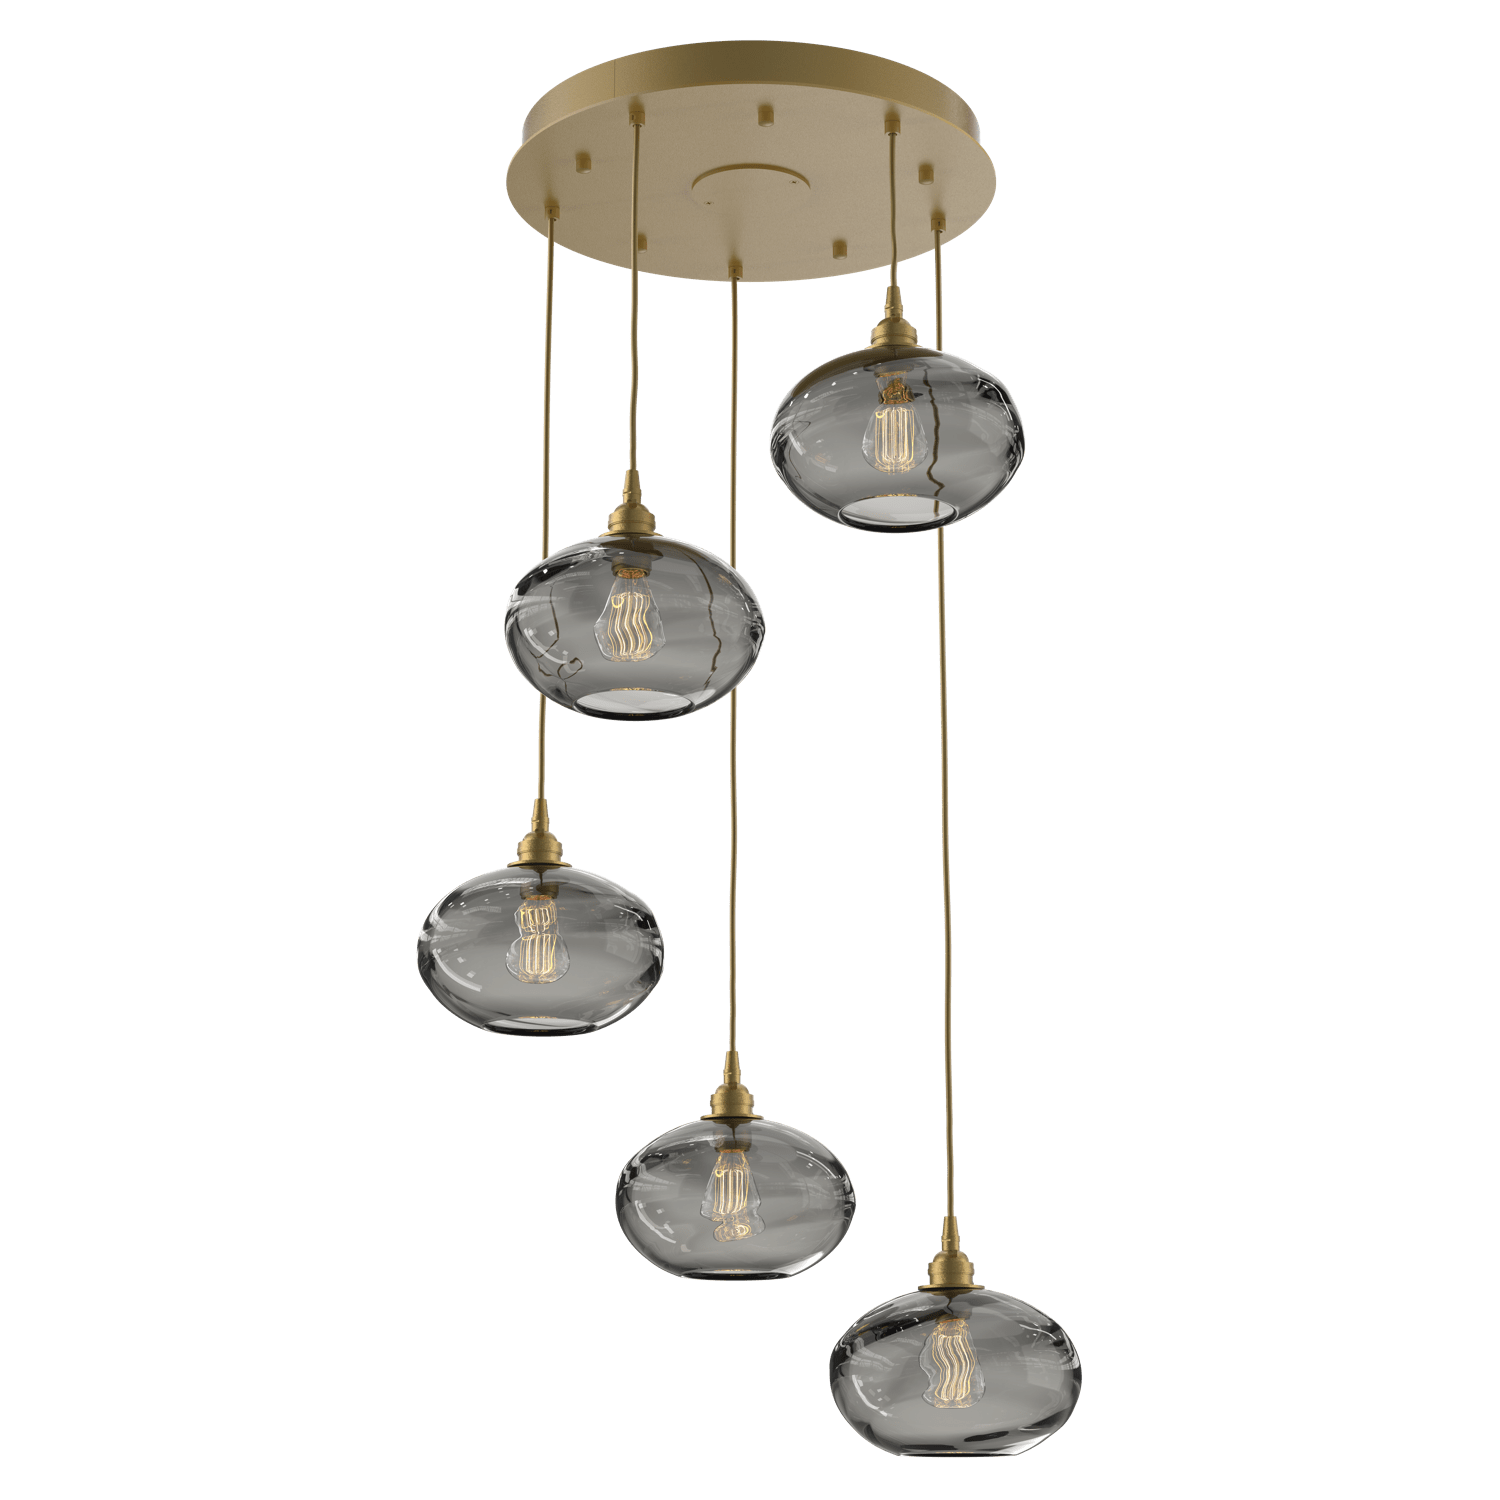 CHB0036-05-GB-OS-Hammerton-Studio-Optic-Blown-Glass-Coppa-5-light-round-pendant-chandelier-with-gilded-brass-finish-and-optic-smoke-blown-glass-shades-and-incandescent-lamping